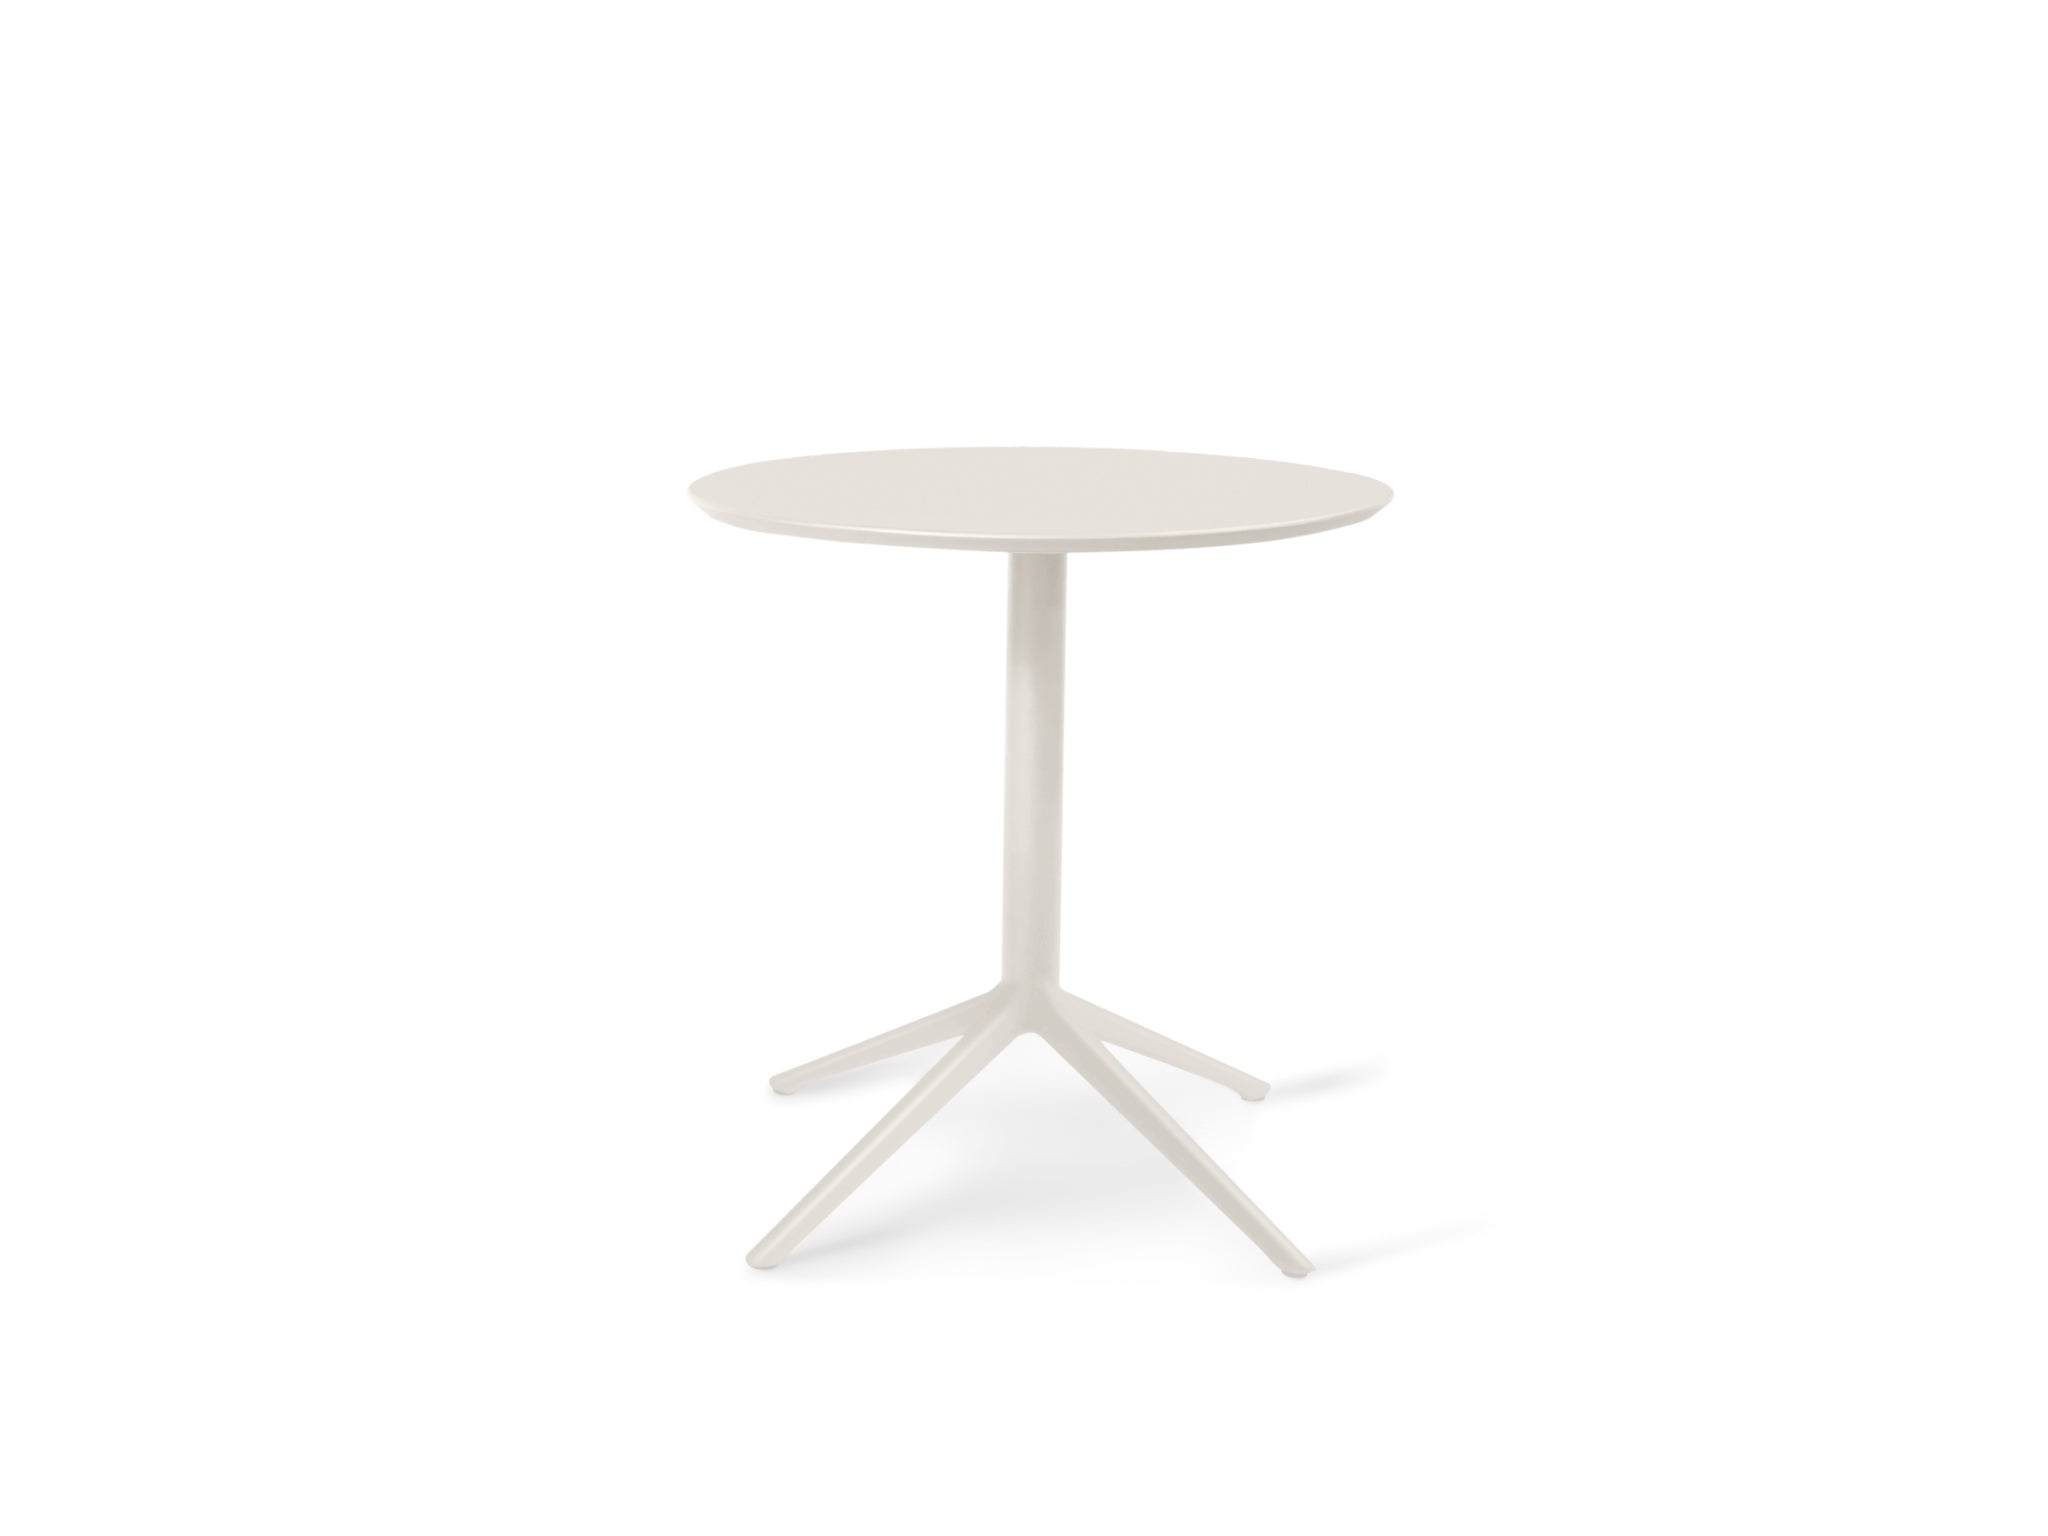 SIMPO by Sunlongarden Aimmi Round Dining Table